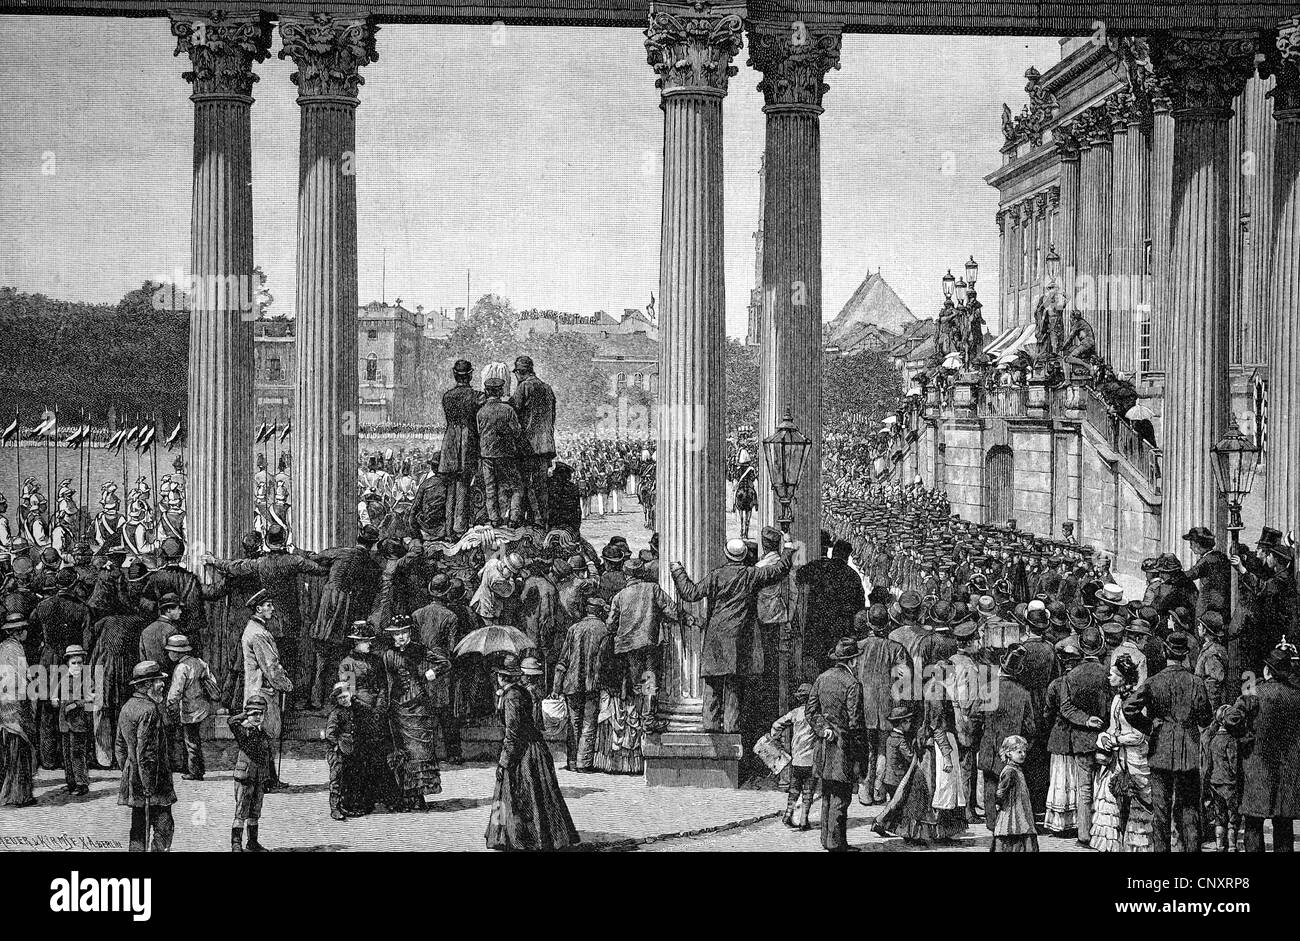 Parade in the Lustgarten garden, Potsdam, Germany, historical engraving, about 1888 Stock Photo